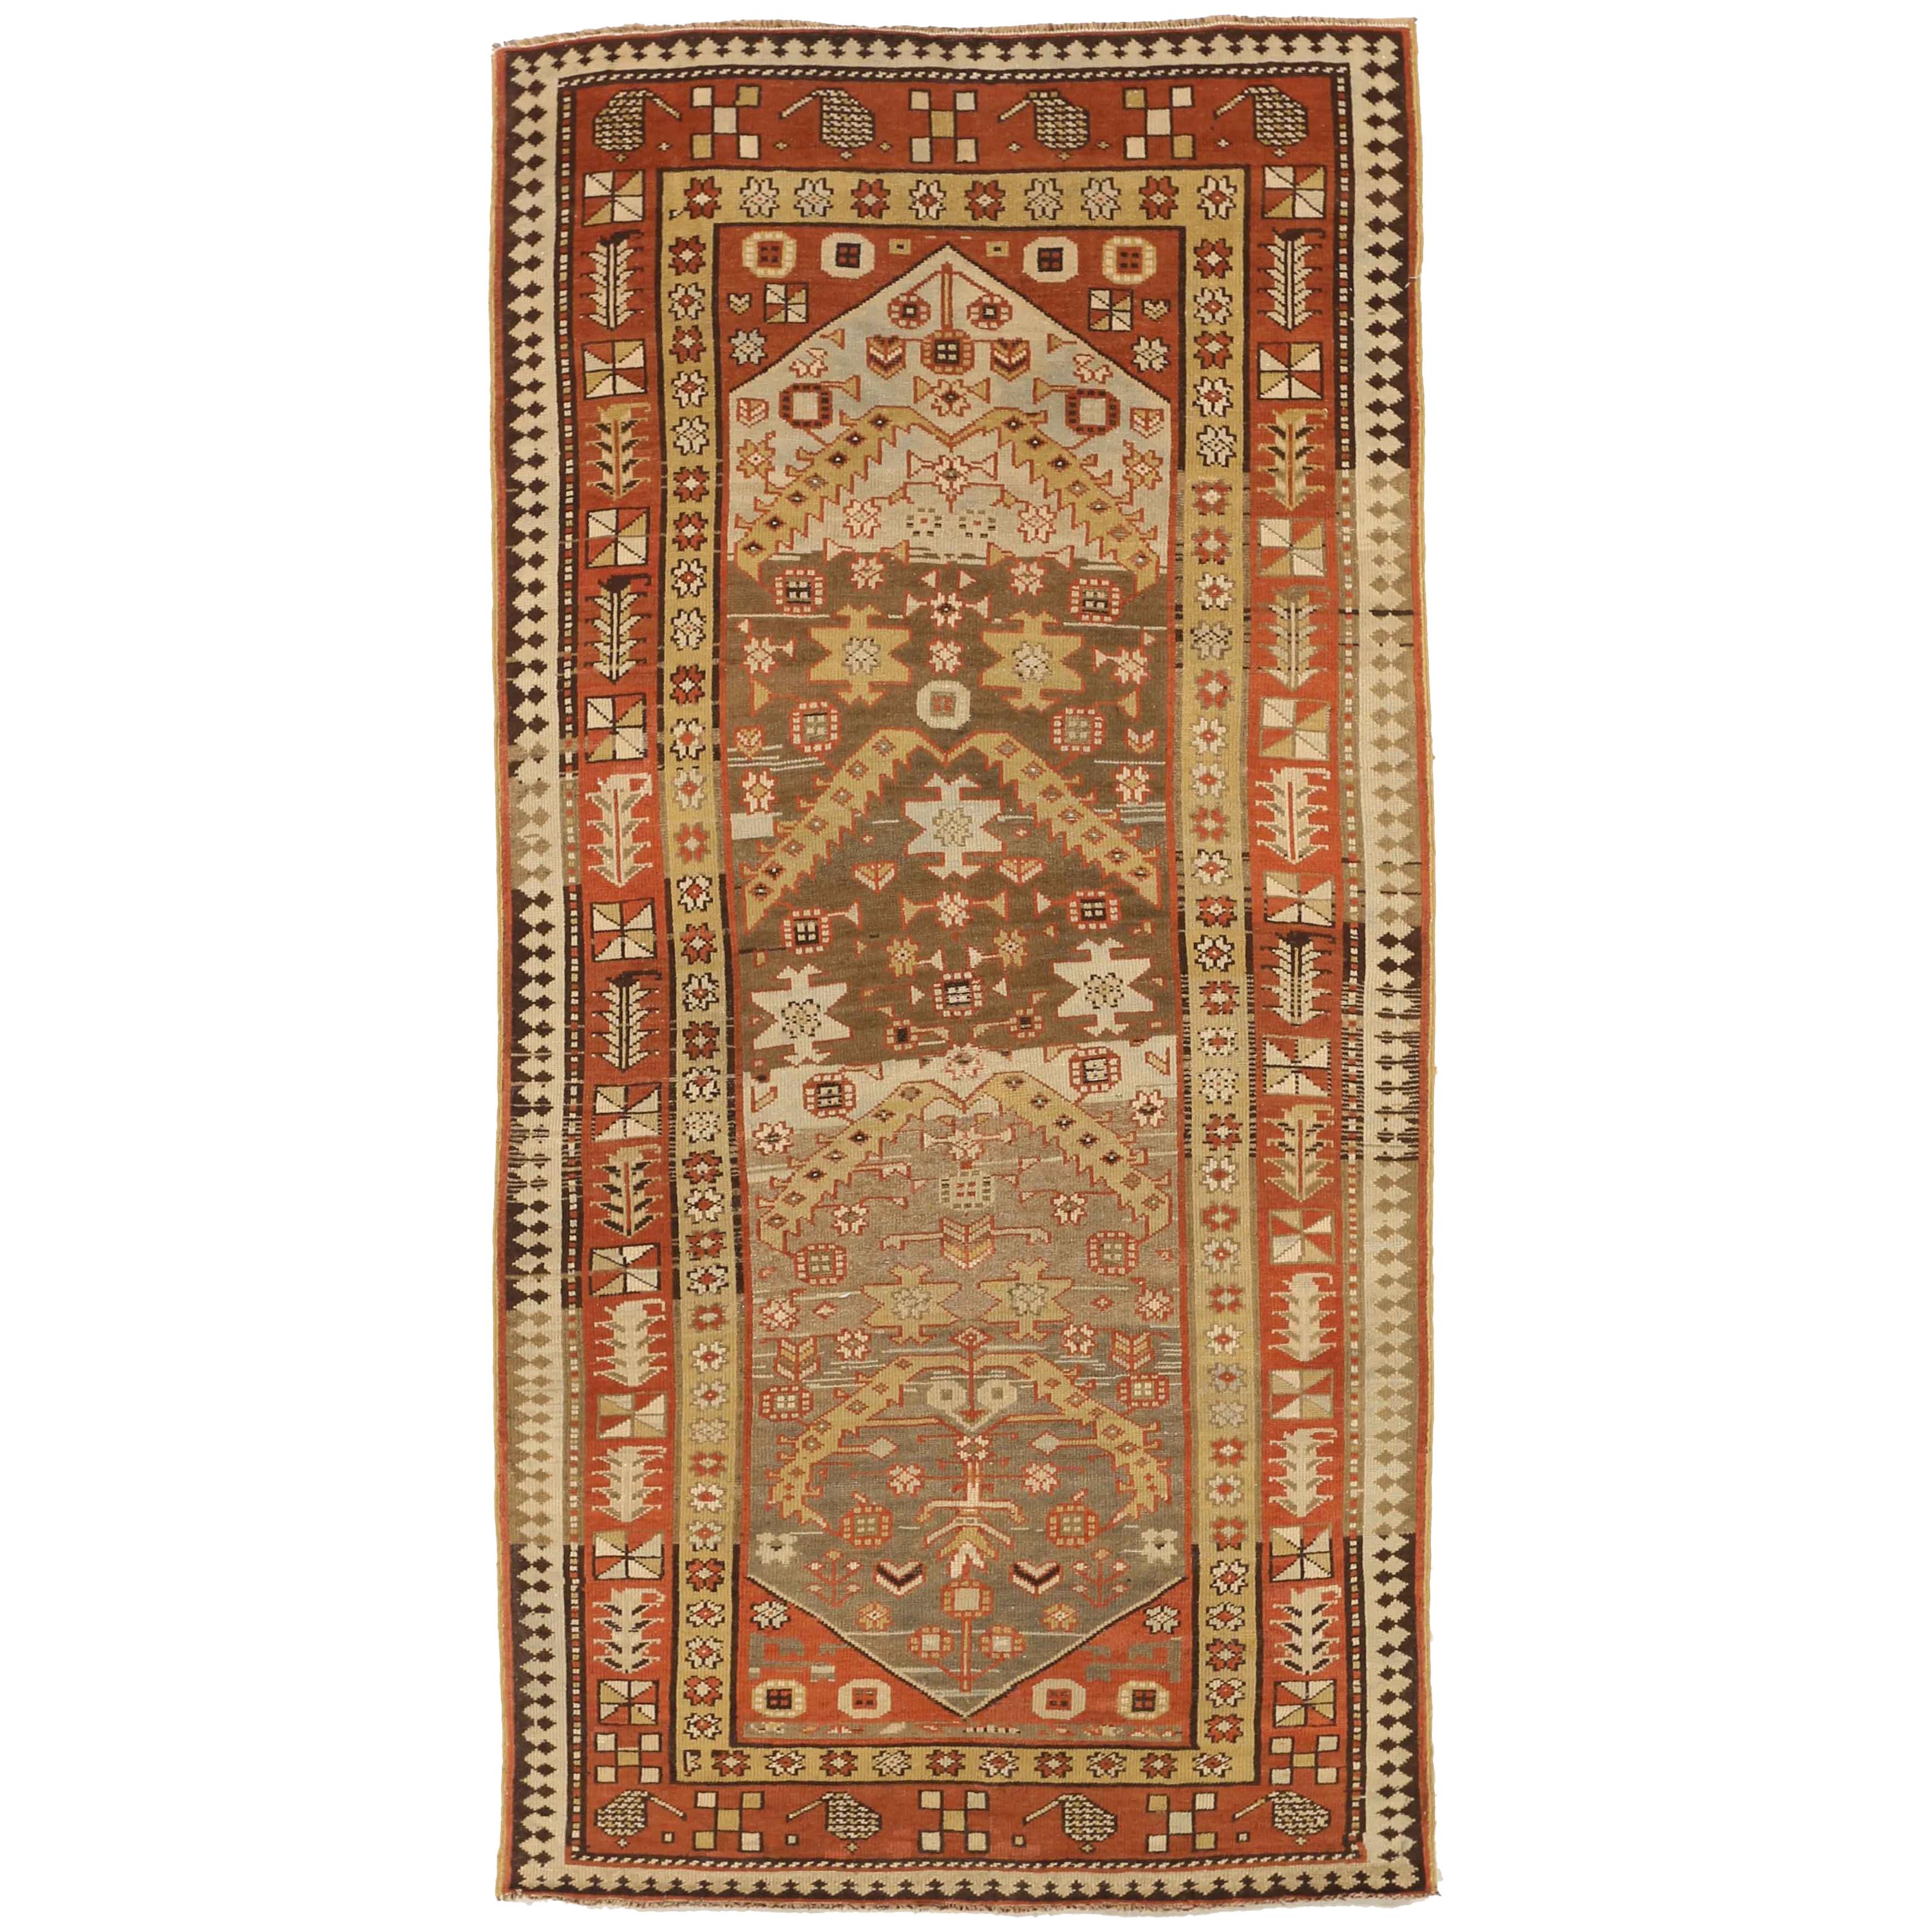 Antique Persian Rug Ghafghaz Style with Ancient Tribal Design, circa 1920s